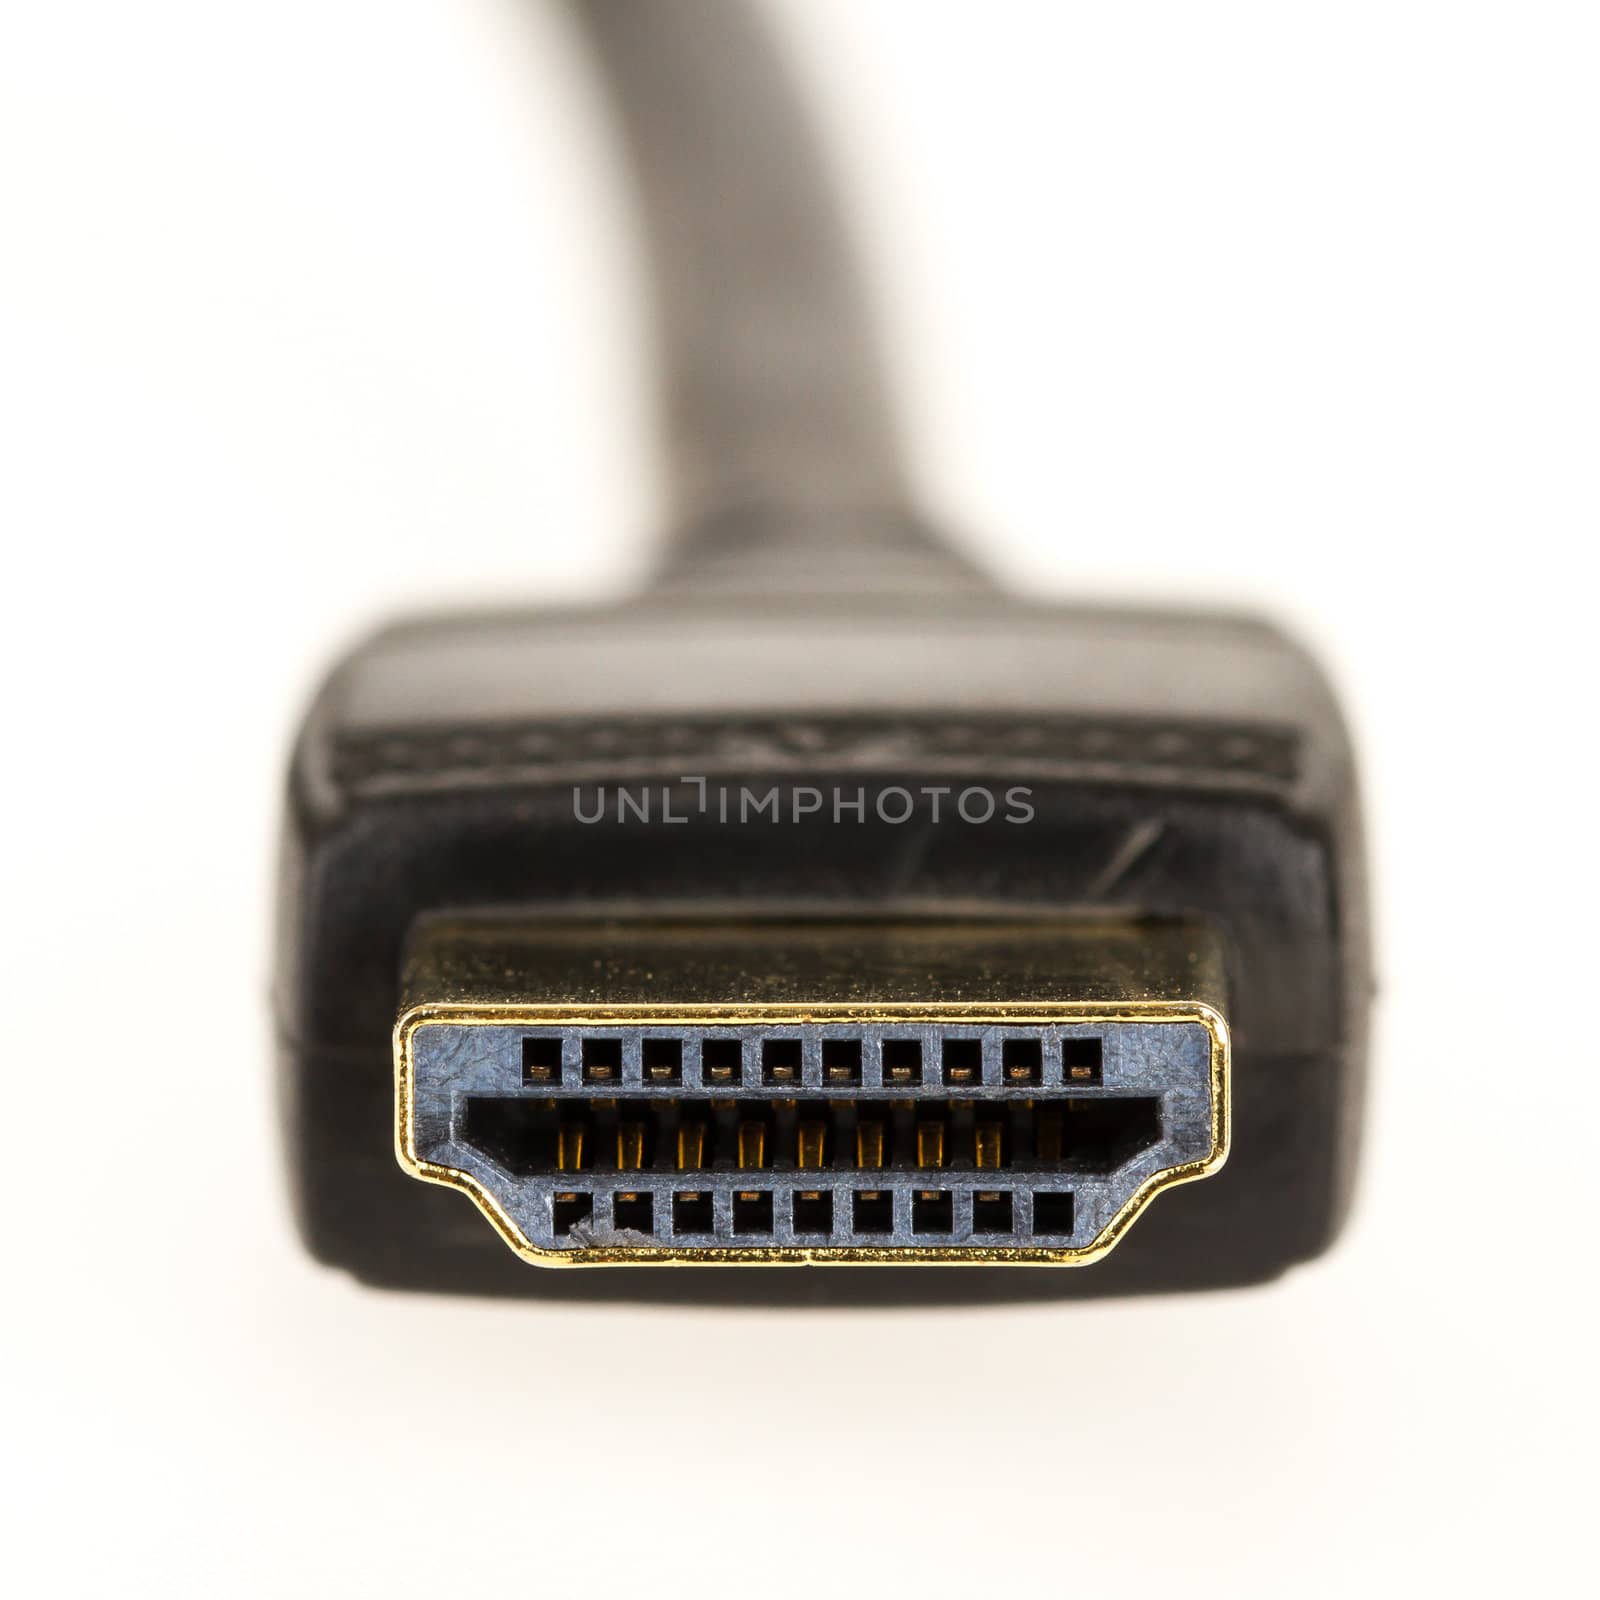 Close-up of hdmi cable by michaklootwijk